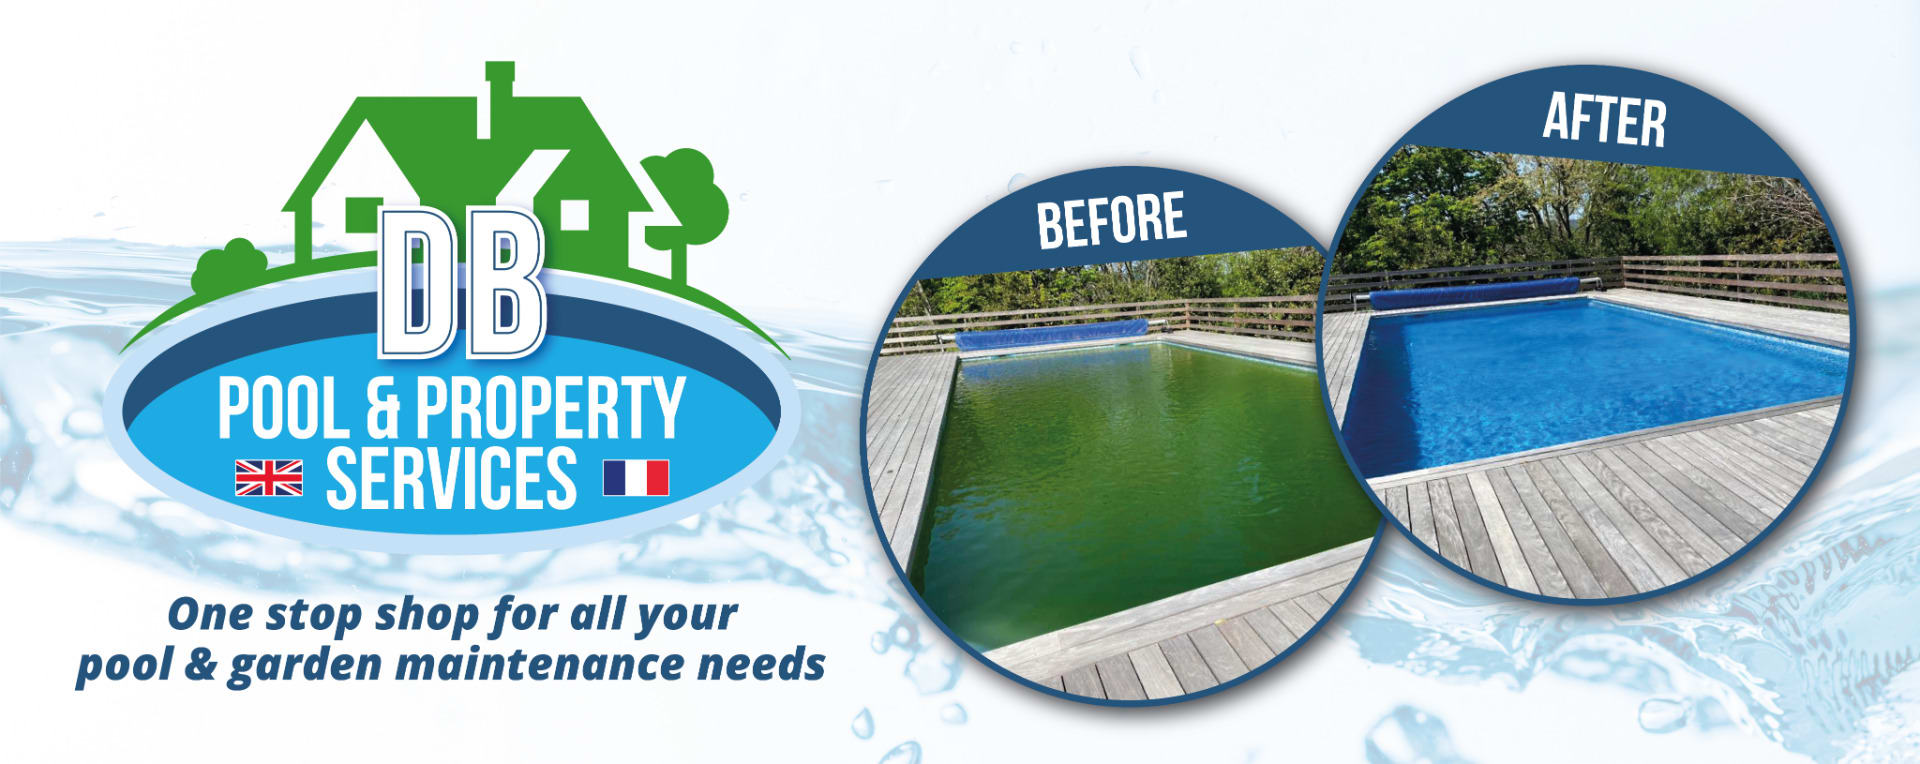 DB Pool Property Services